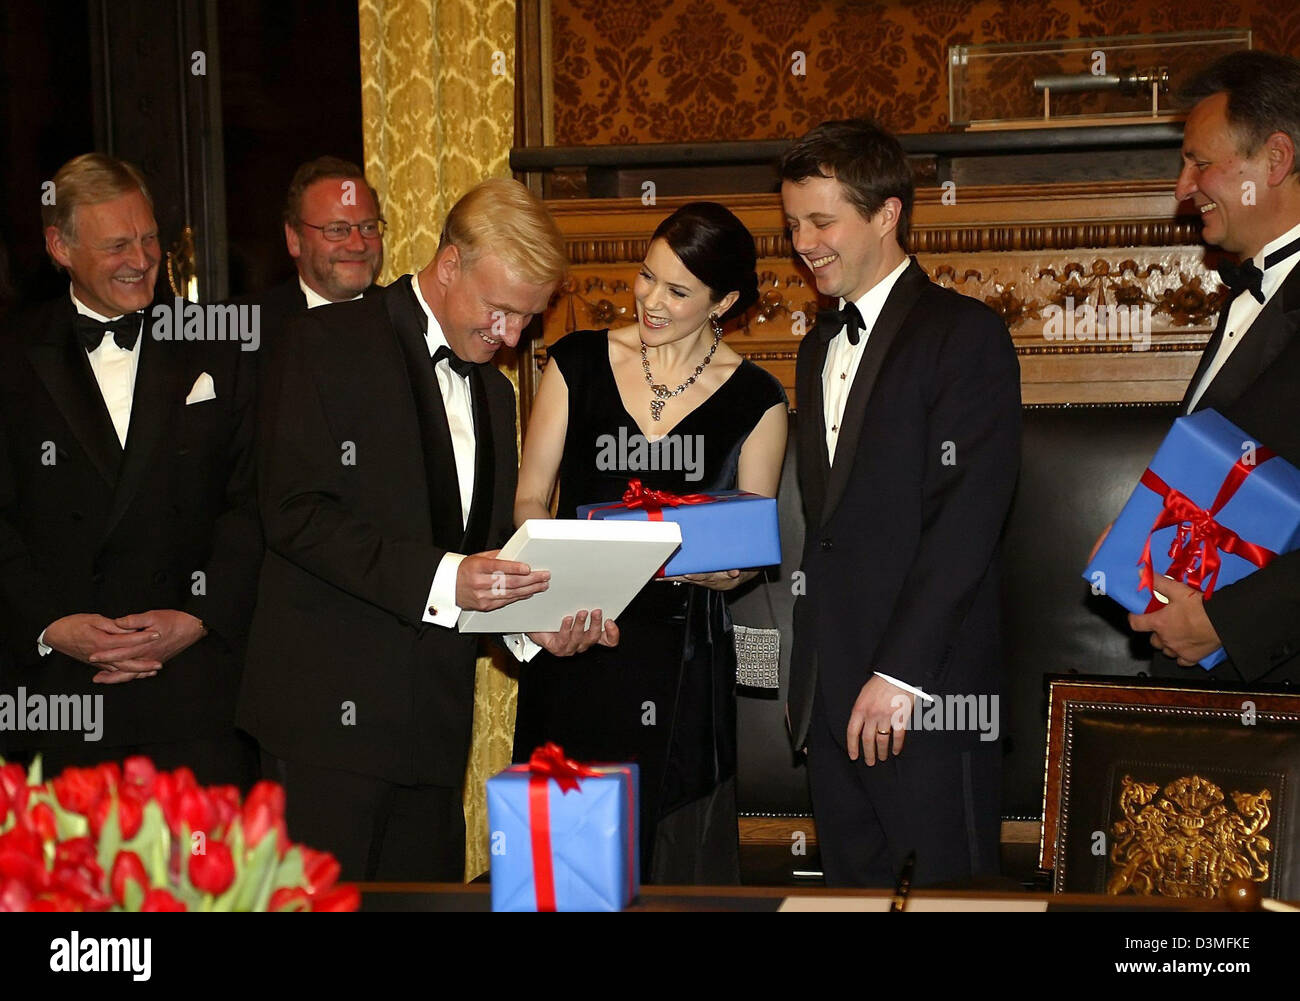 Danish Crown Prince Frederik (2nd from R) and his wife  Crown Princess Mary receive a present from Hamburg's mayor  Ole von Beust  ahead of the traditional Matthiae meal at the town hall in Hamburg, Germany, Friday, 17 February 2006. The Danish Crown Prince and Crown Princess were invited to the traditional meal honouring Hamburg's and Denmark's relations. Photo: Guido Ohlenbostel Stock Photo